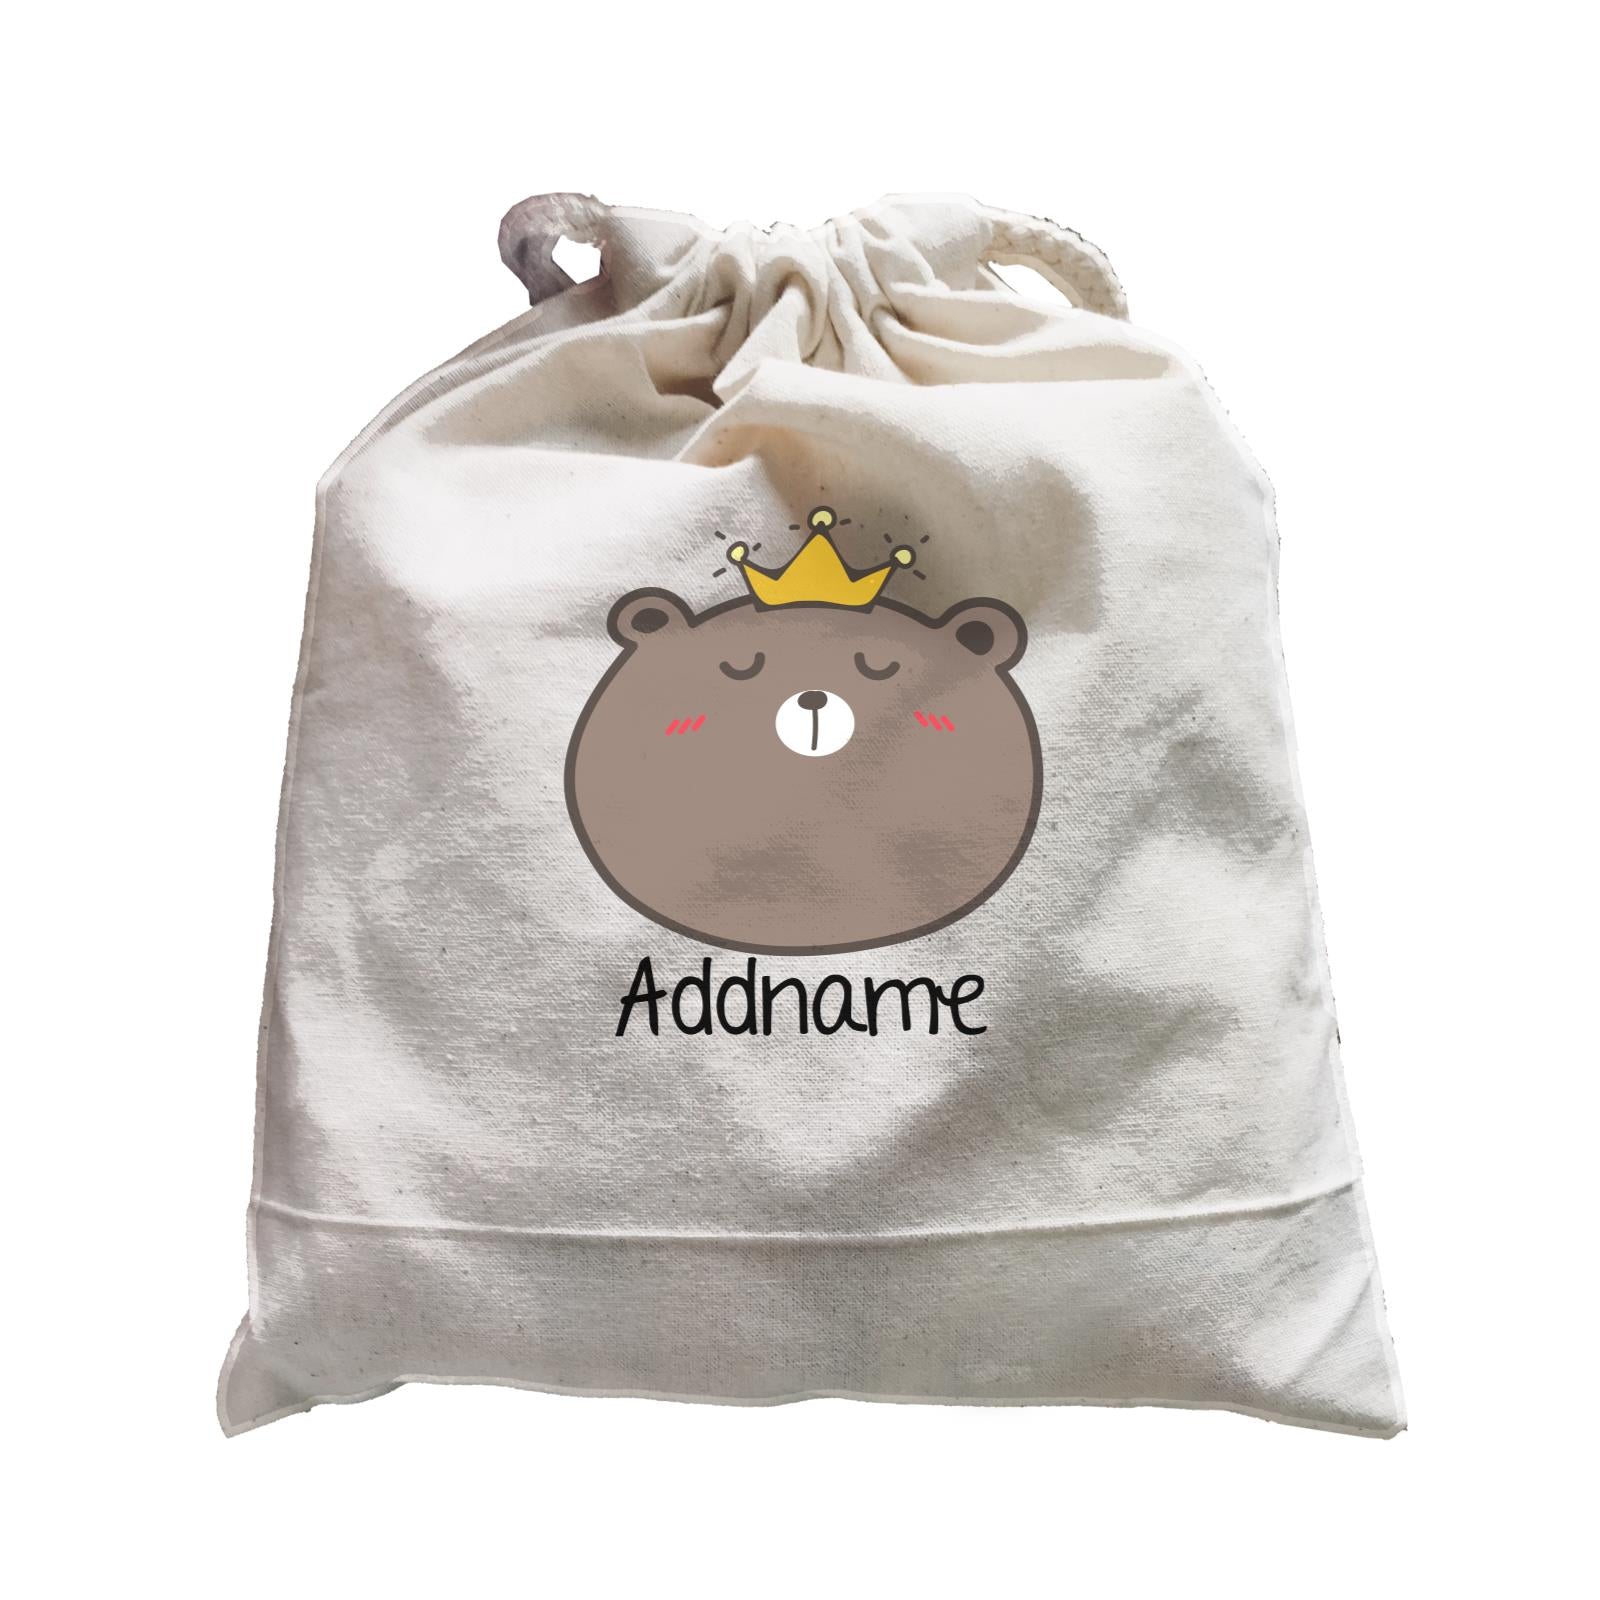 Cute Animals And Friends Series Cute Brown Bear With Crown Addname Satchel